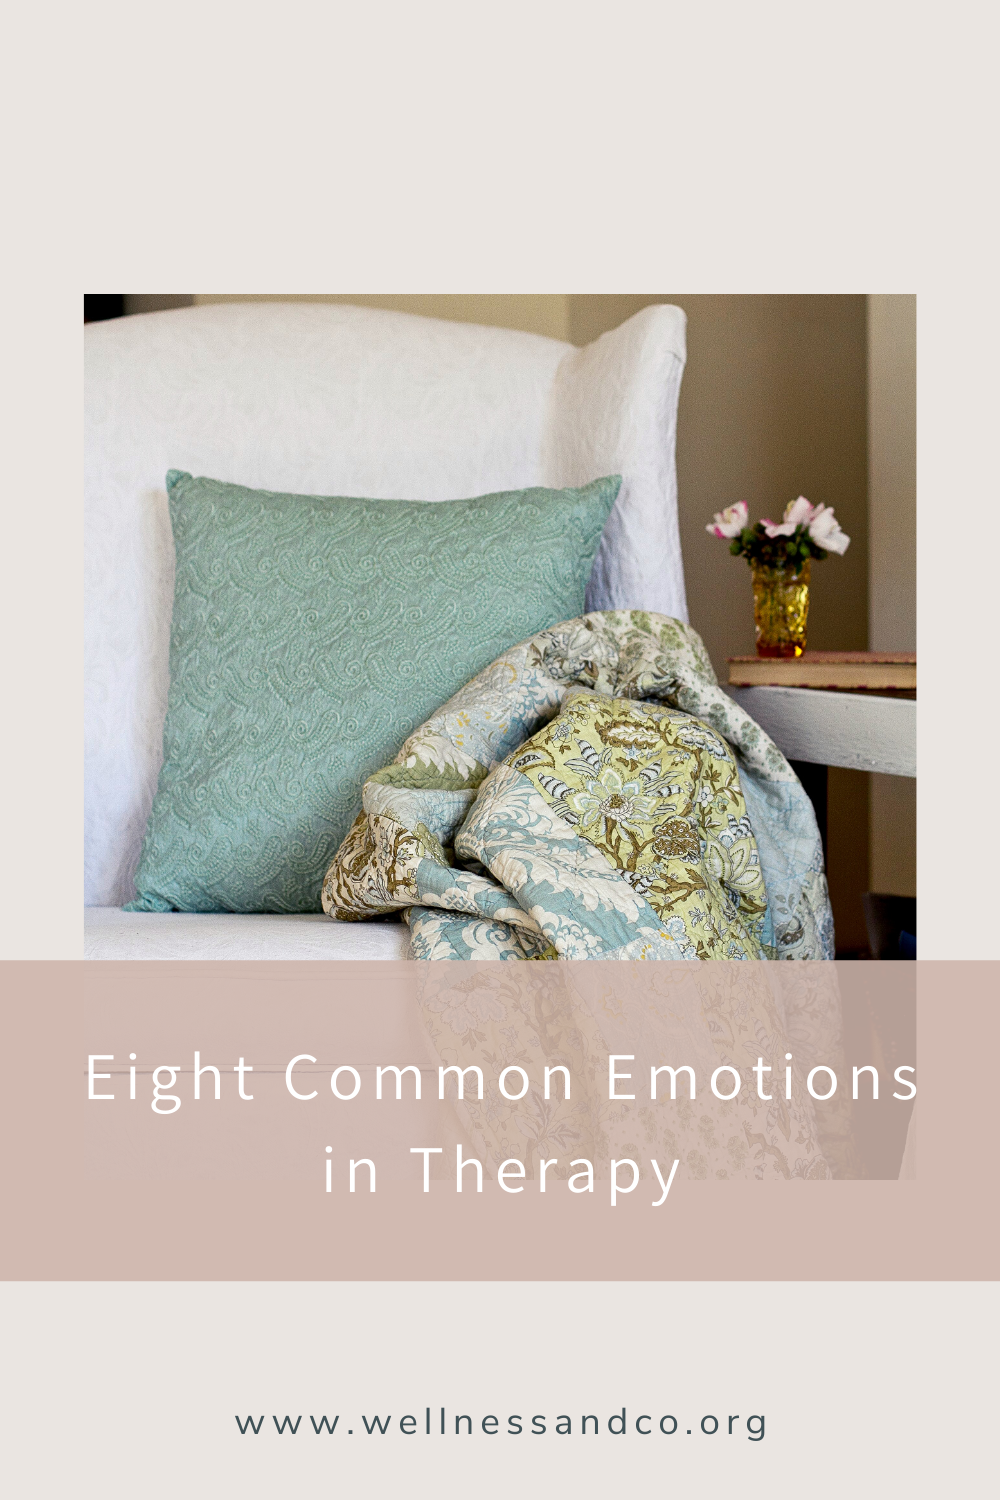 Eight Common Emotions in Therapy | This post provides a look into the common emotions experienced in therapy, through poem form. Dig deeper into the eyes of a therapist and what eight emotions commonly surface. Plus, learn which emotion is often not as present in therapy.